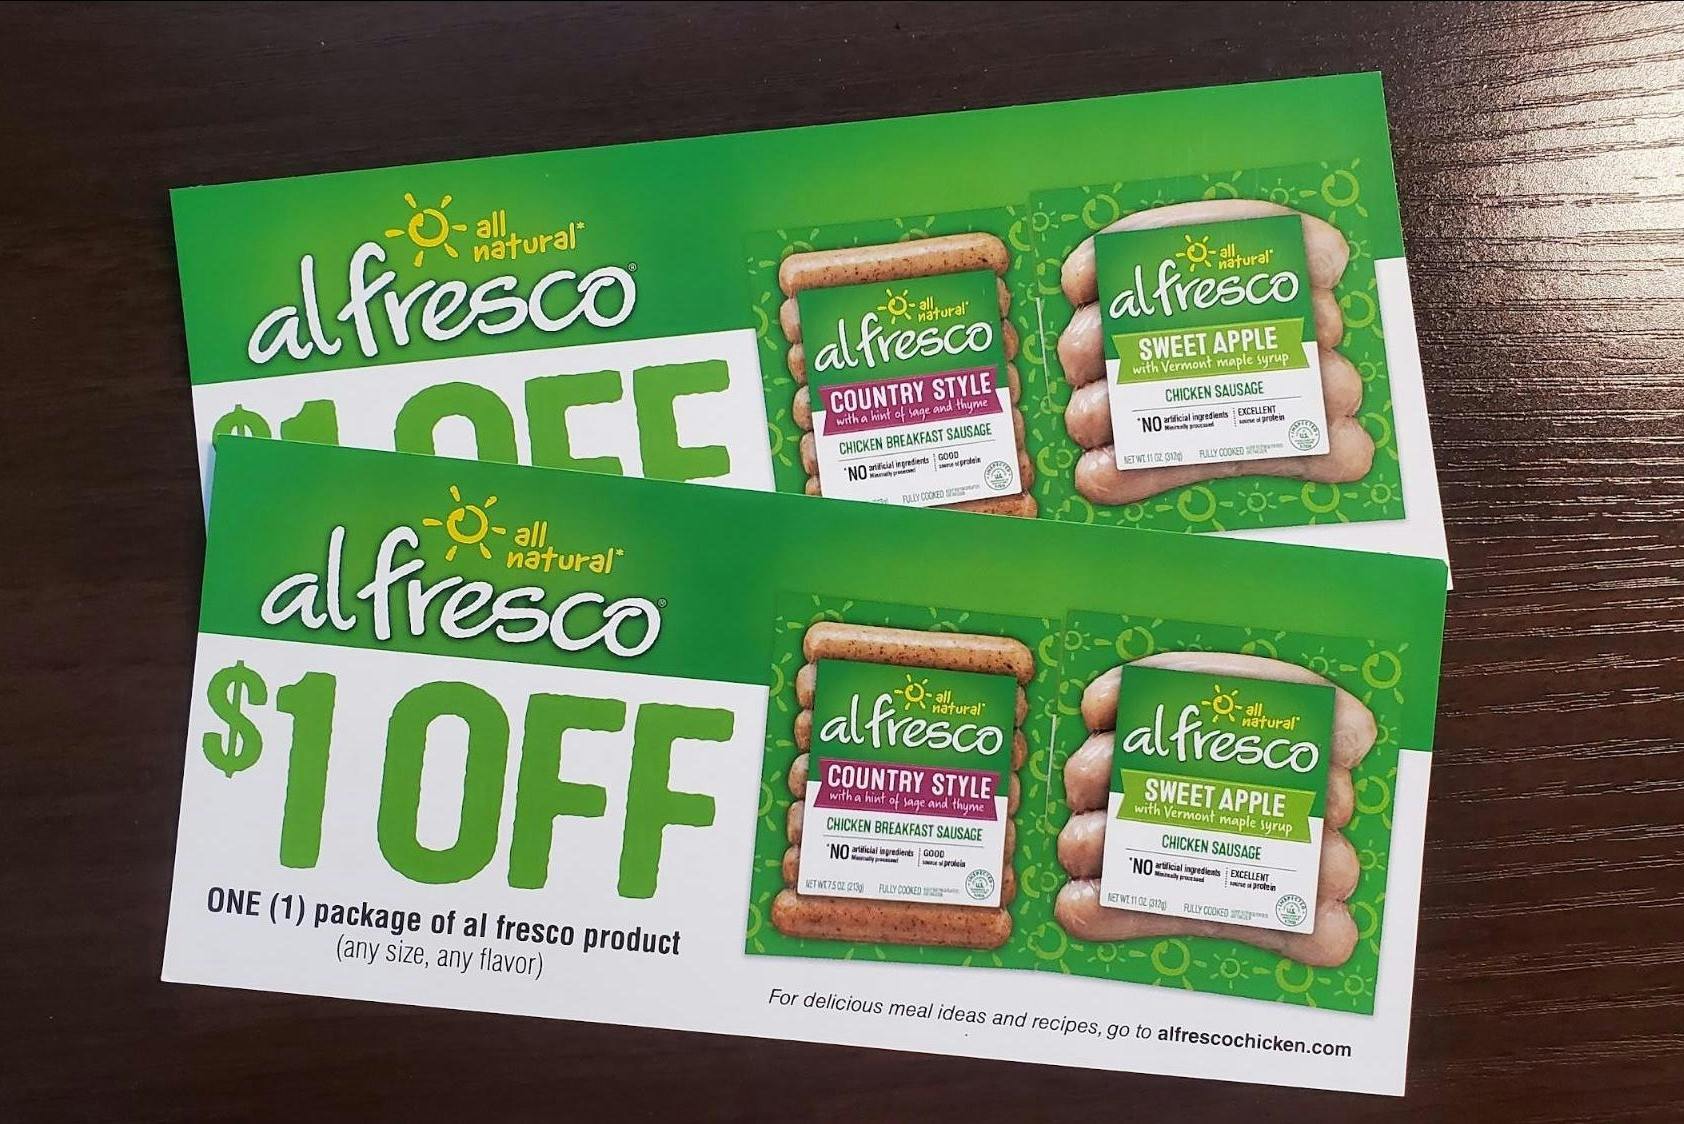 Two $1 off Al Fresco coupons on a table.